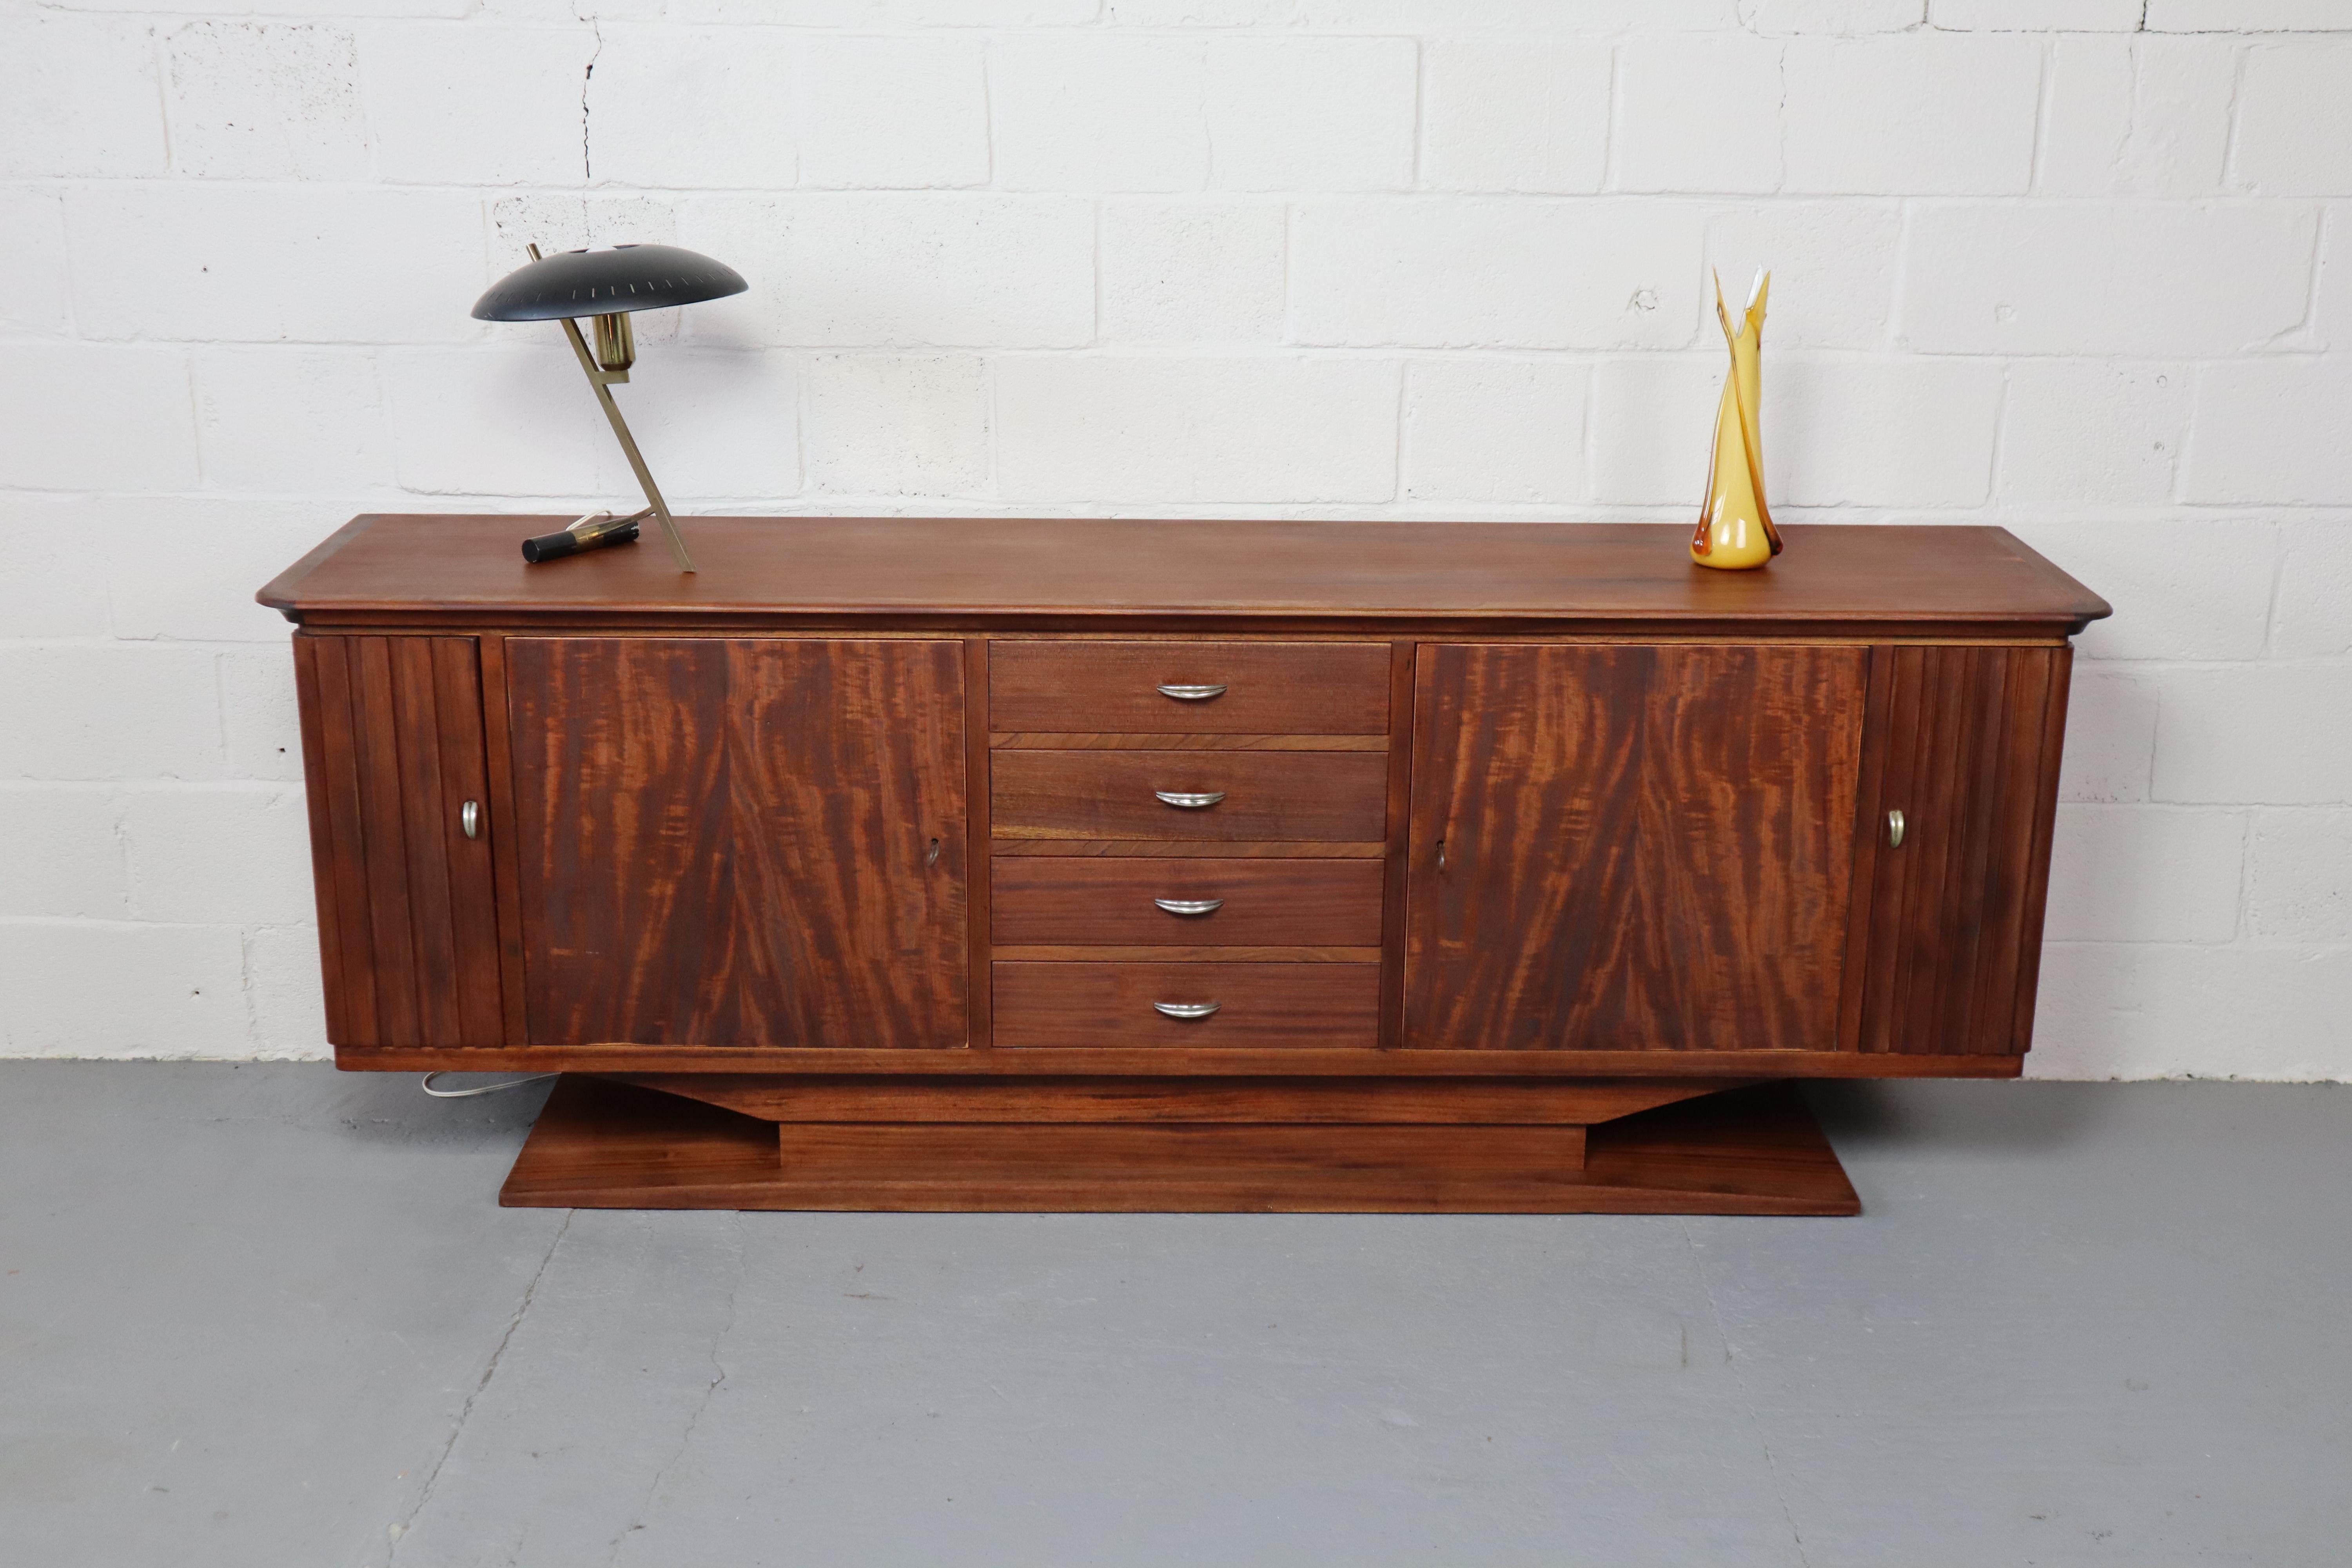 Vintage Dutch teak sideboard with both Mid-century and Art-deco features.